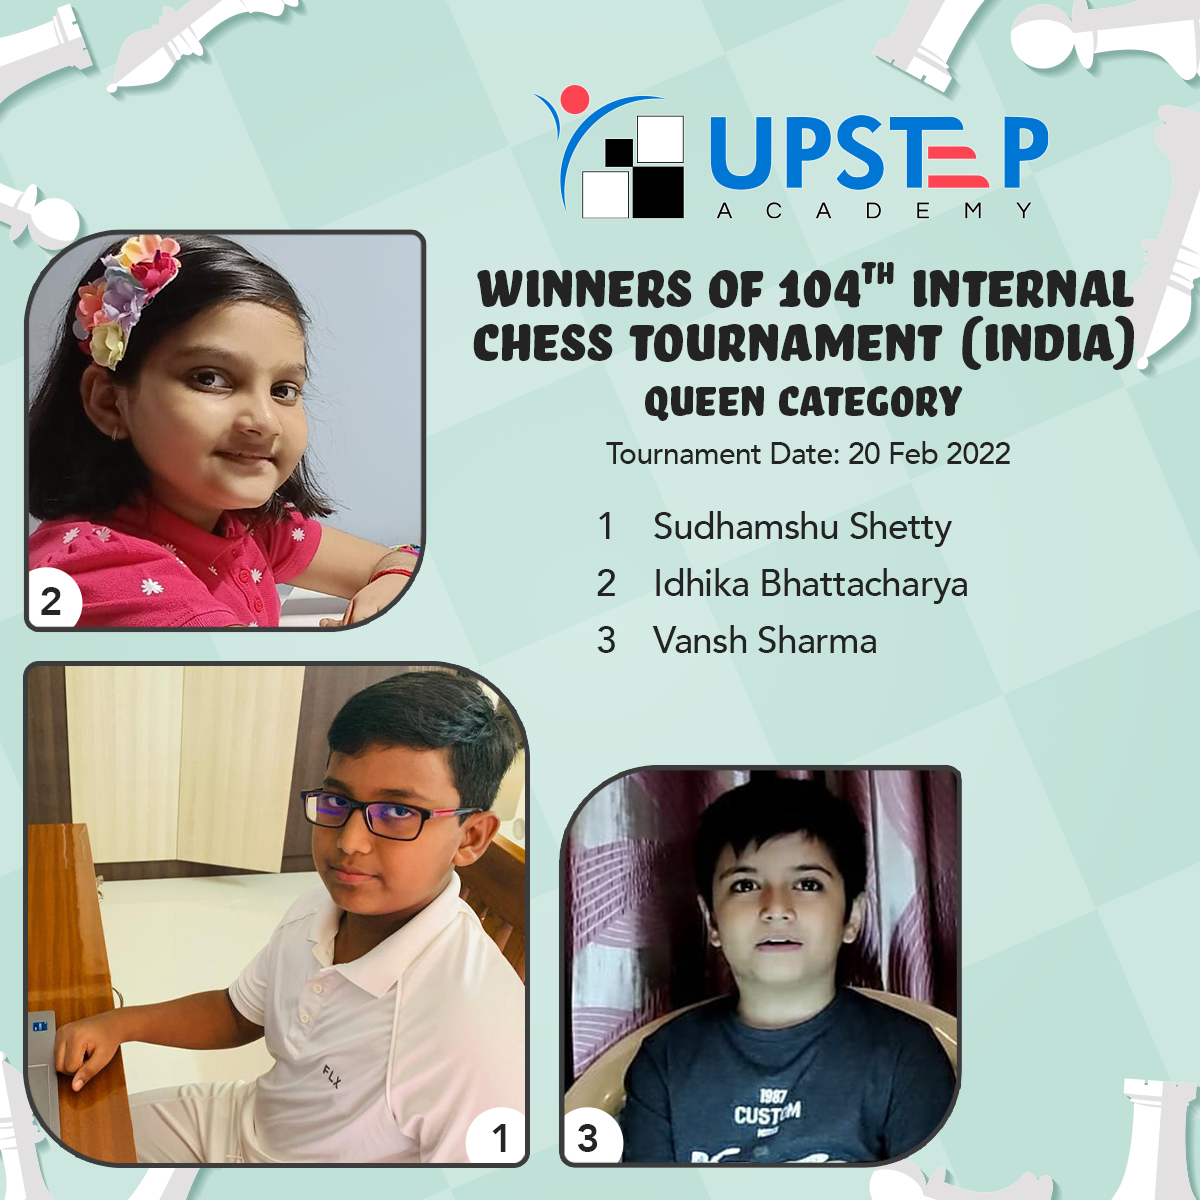 Upstep Academy - Sneak peek - A question asked by one of our students  during our webinar with GM Viswanathan Anand . #UpstepAcademy #chesschild # chess #OnlineChess #learnchess #onlinelearning #didyouknow #chessskill  #chessthoughts #knight #